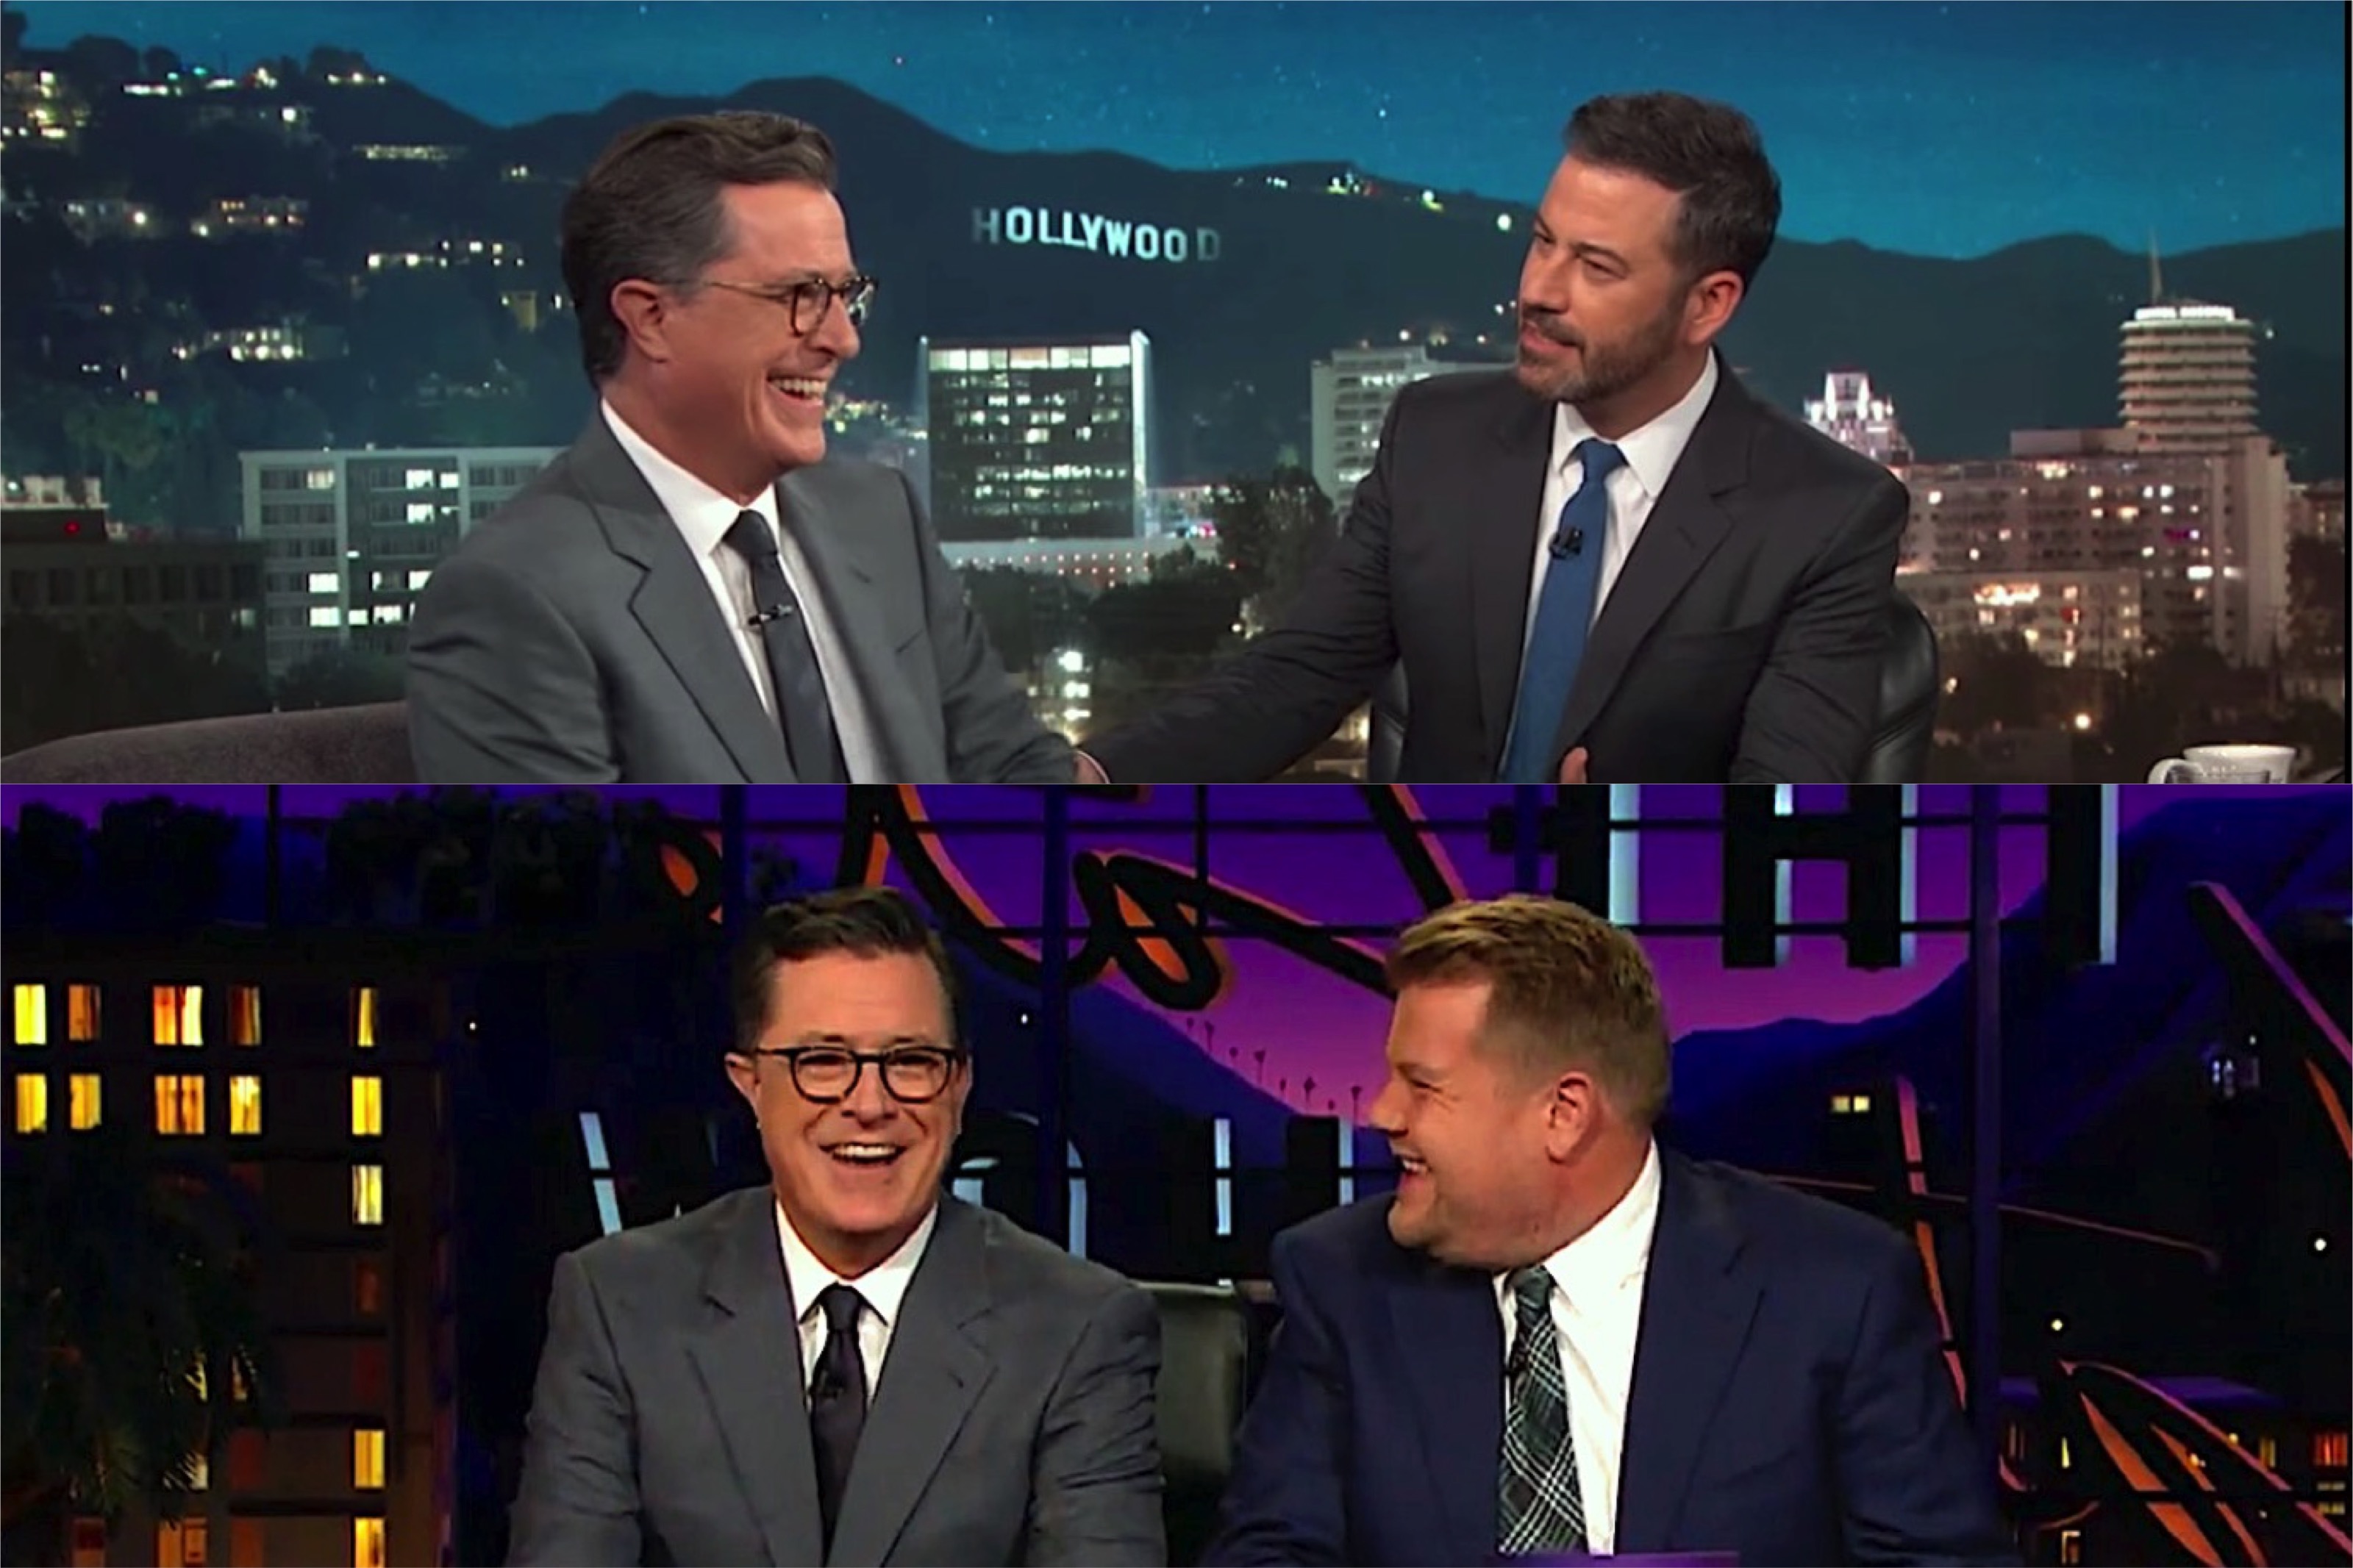 Stephen Colbert makes the late-night rounds